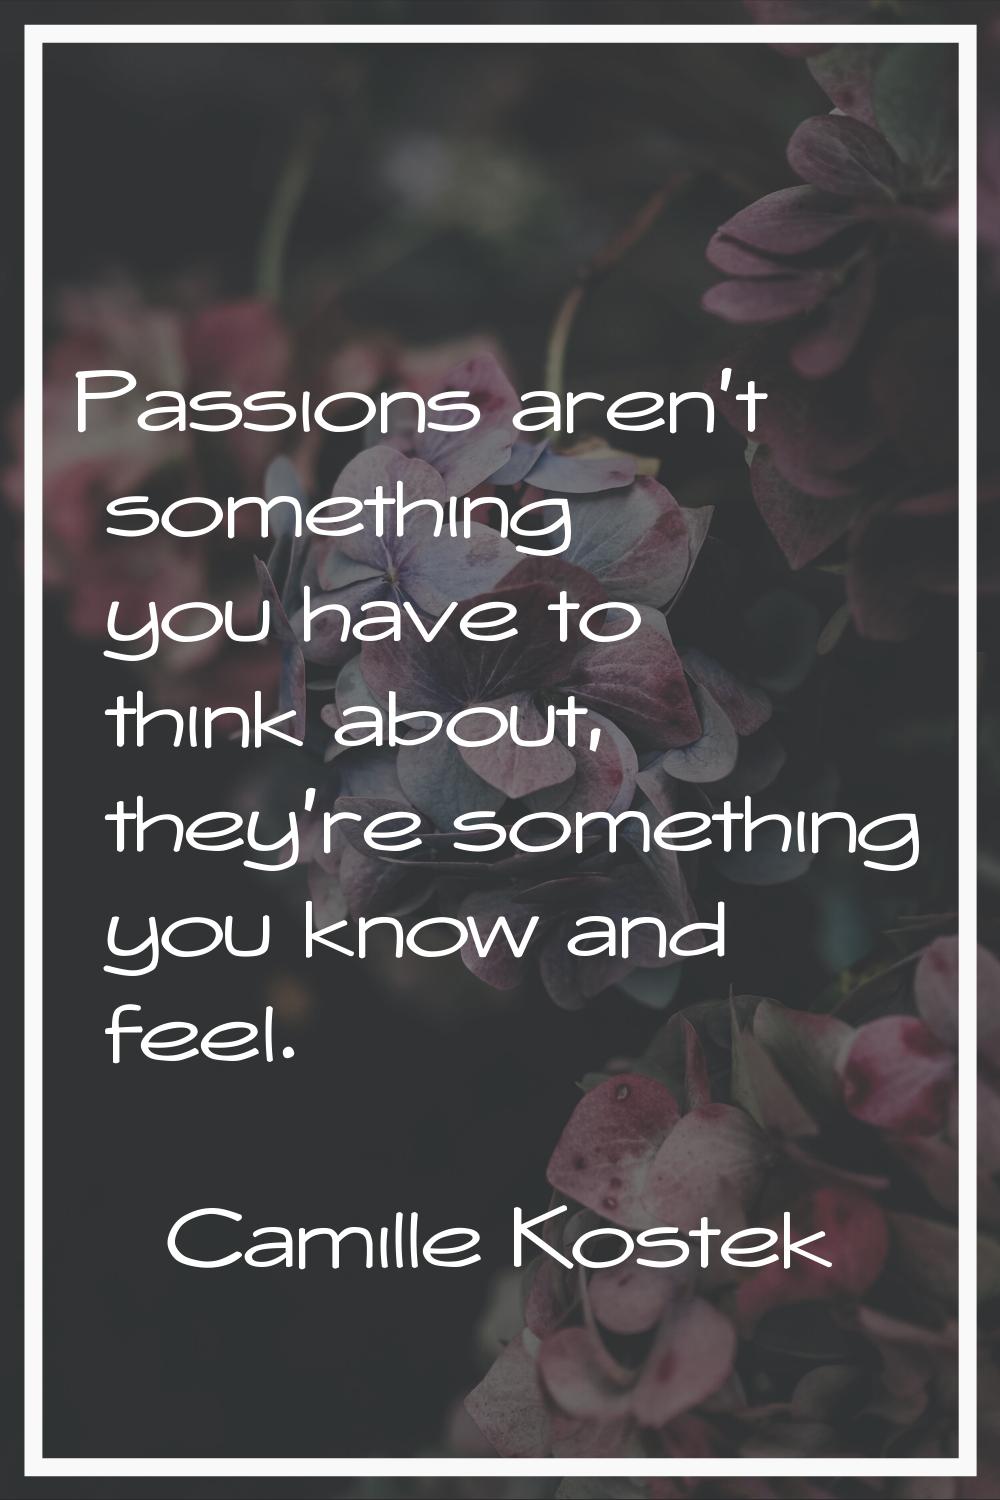 Passions aren't something you have to think about, they're something you know and feel.